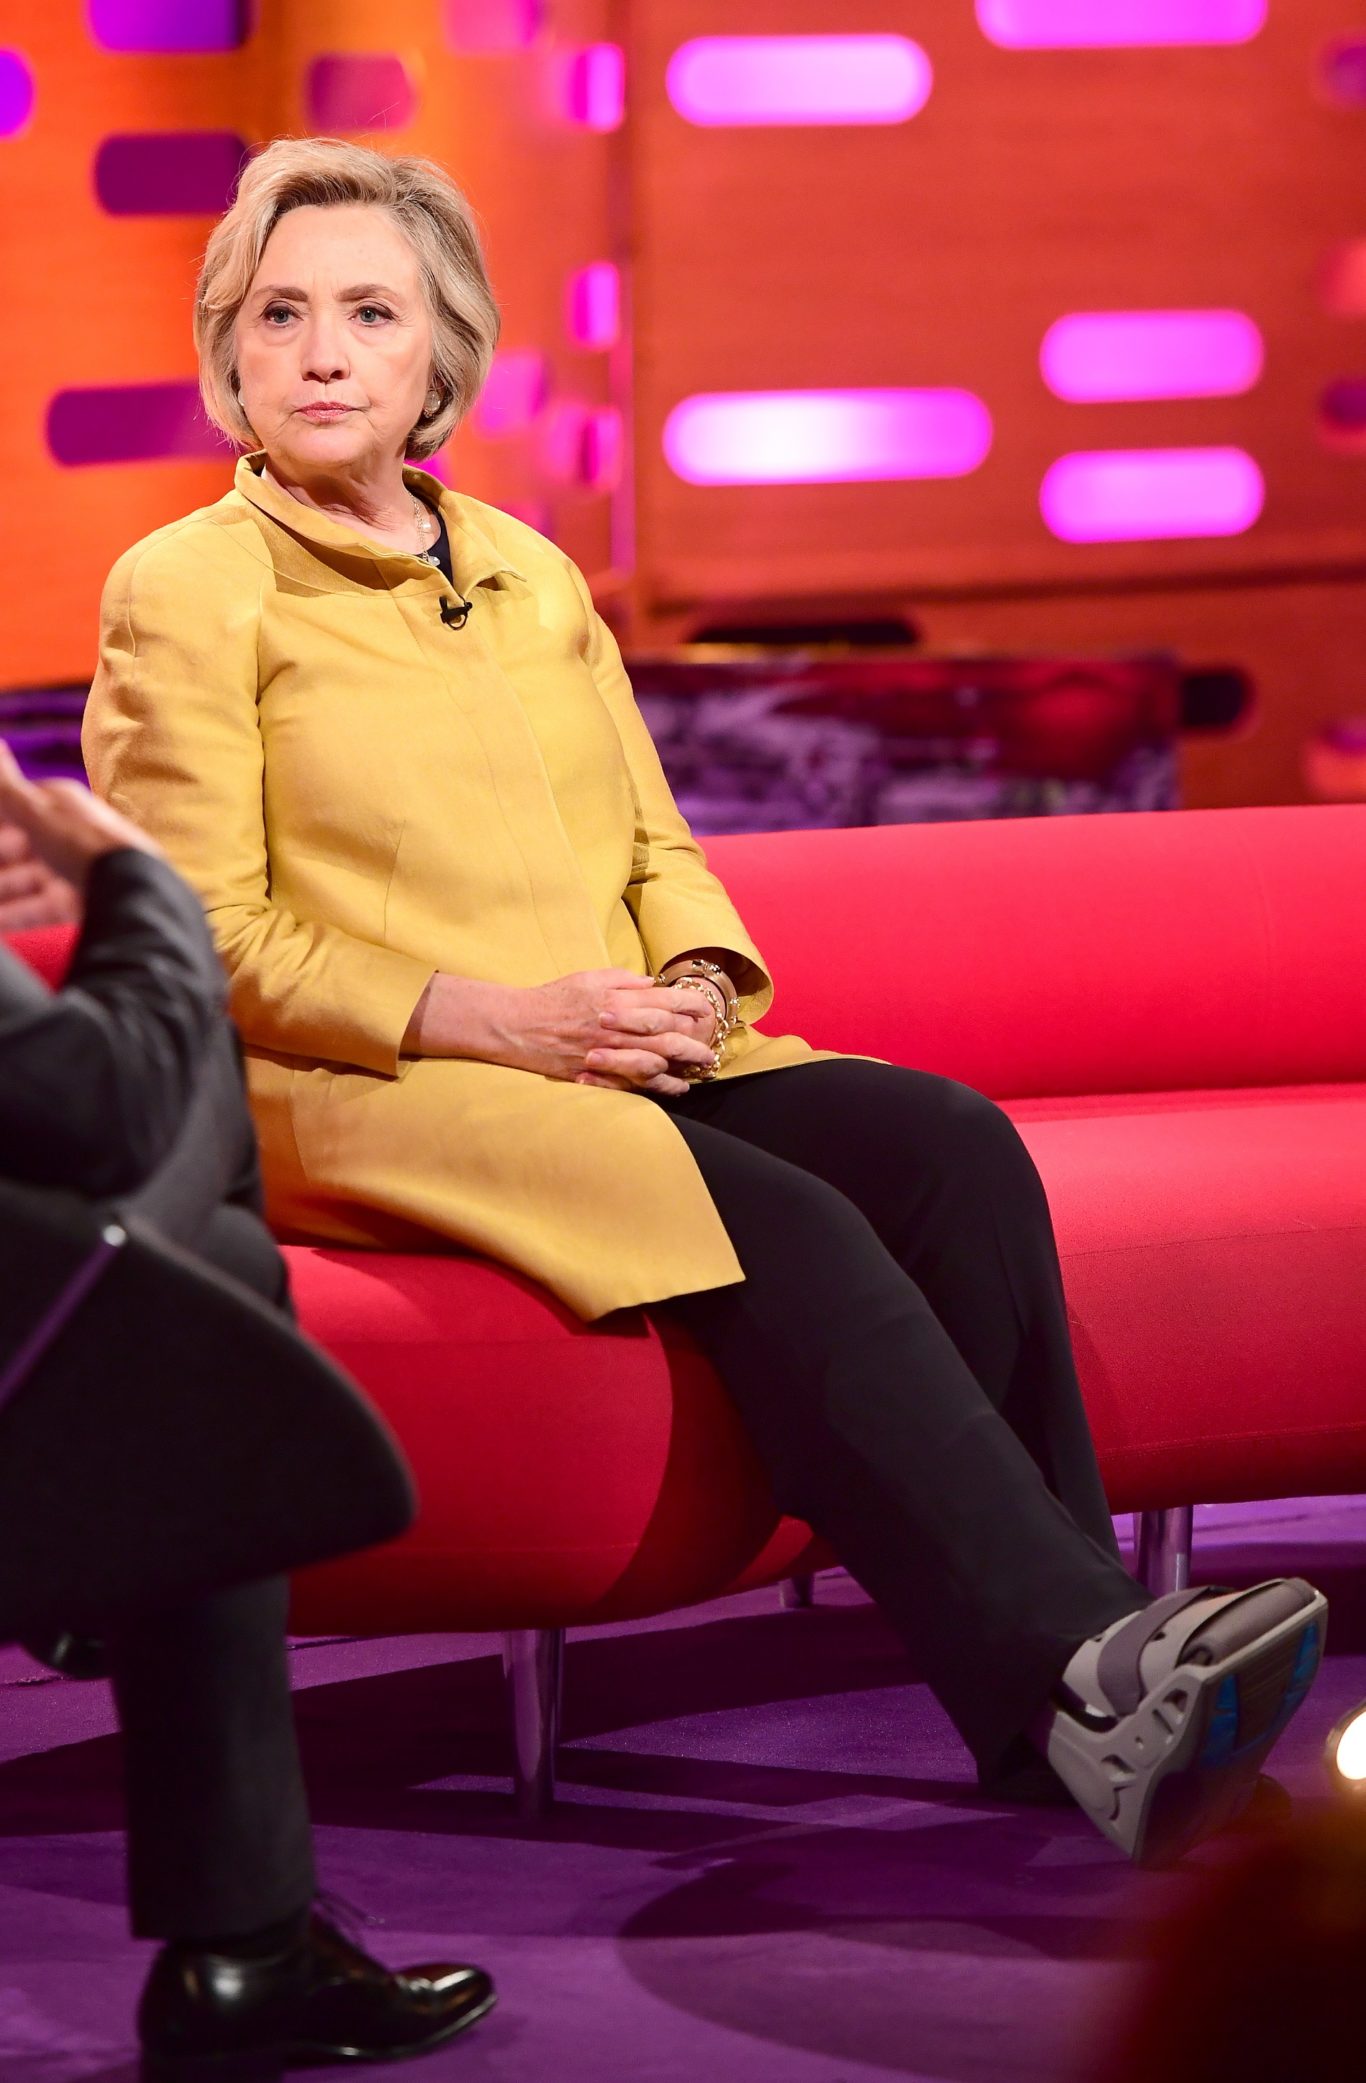 Hillary Clinton during filming of the Graham Norton Show. (So TV/PA Wire)